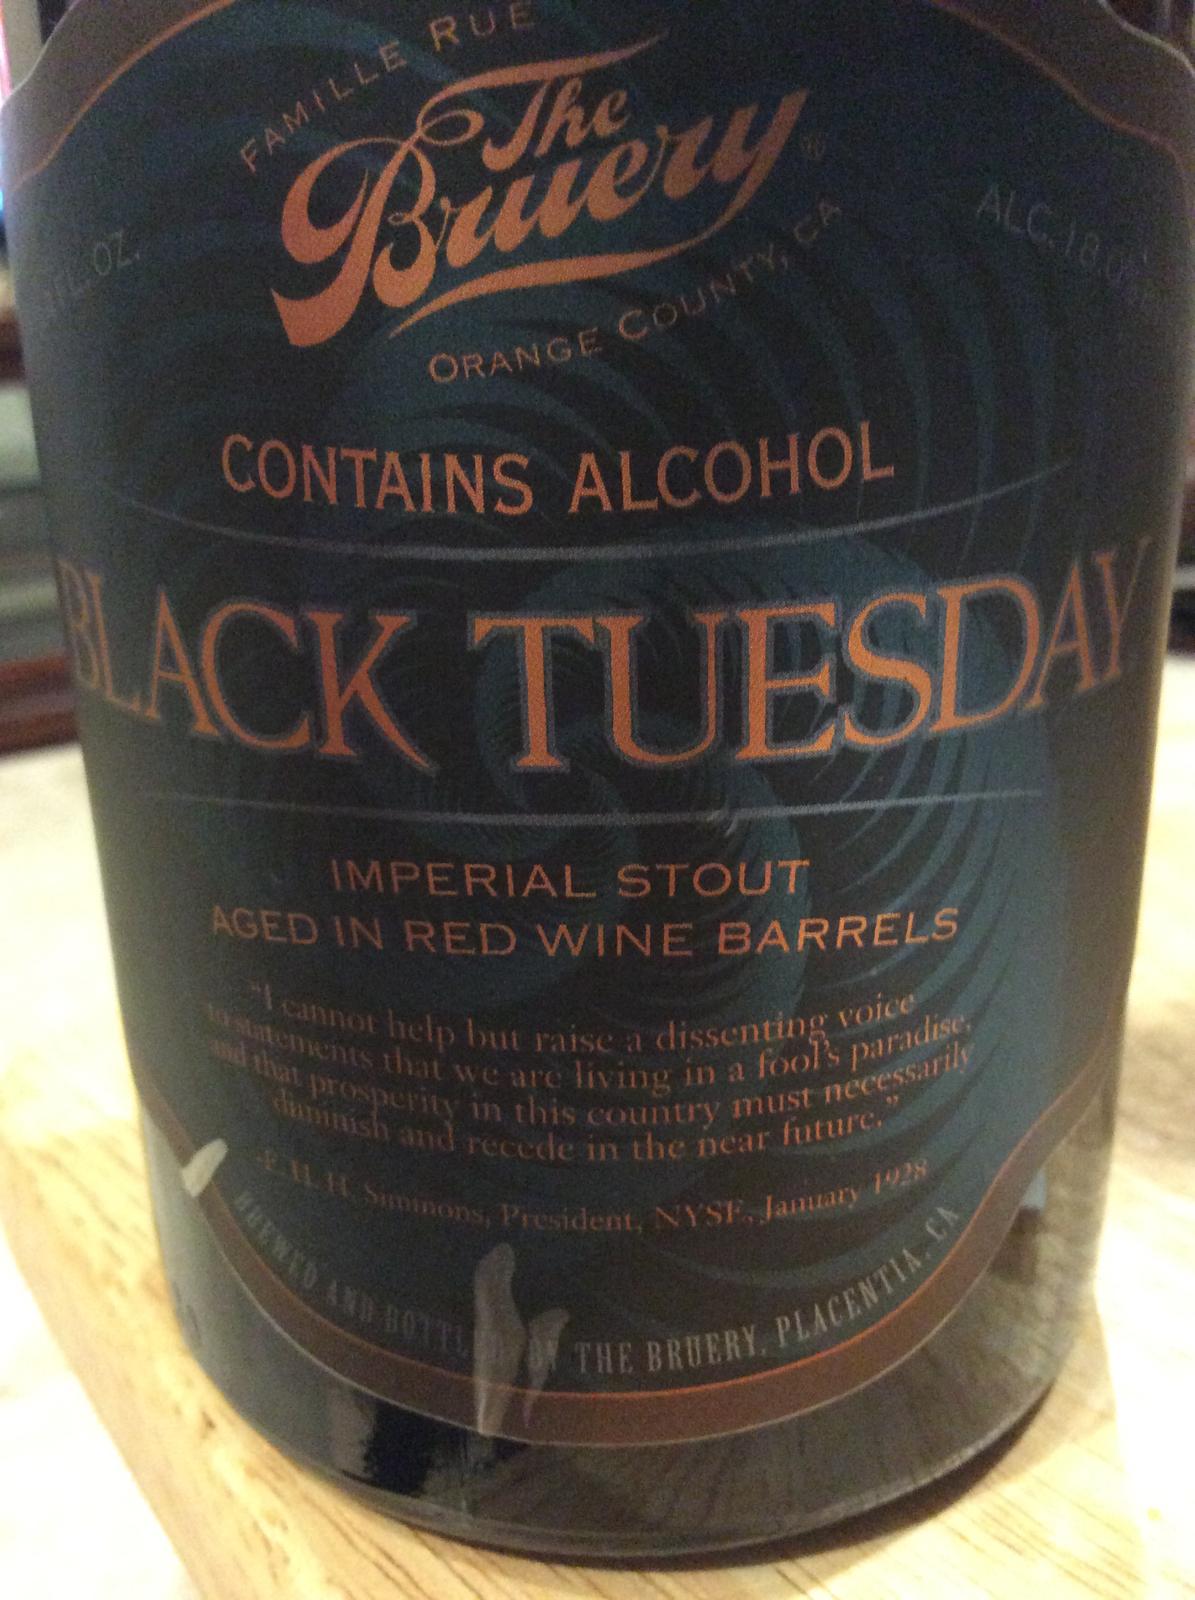 Black Tuesday (Red Wine Barrel Aged)